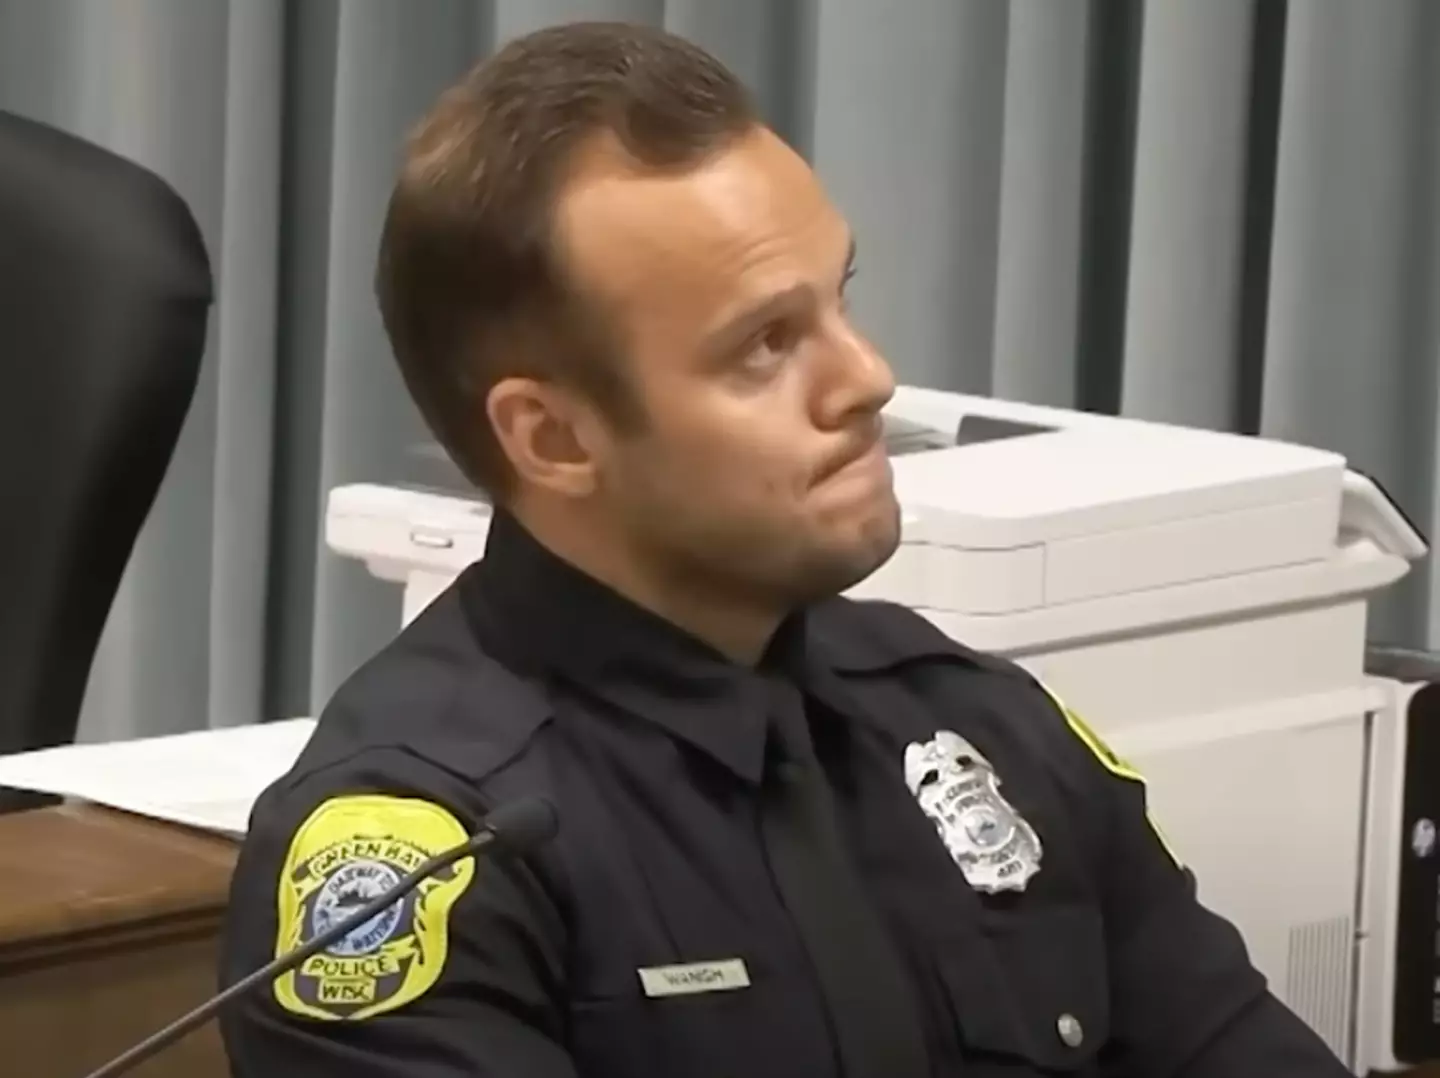 The body cam footage played out in court.